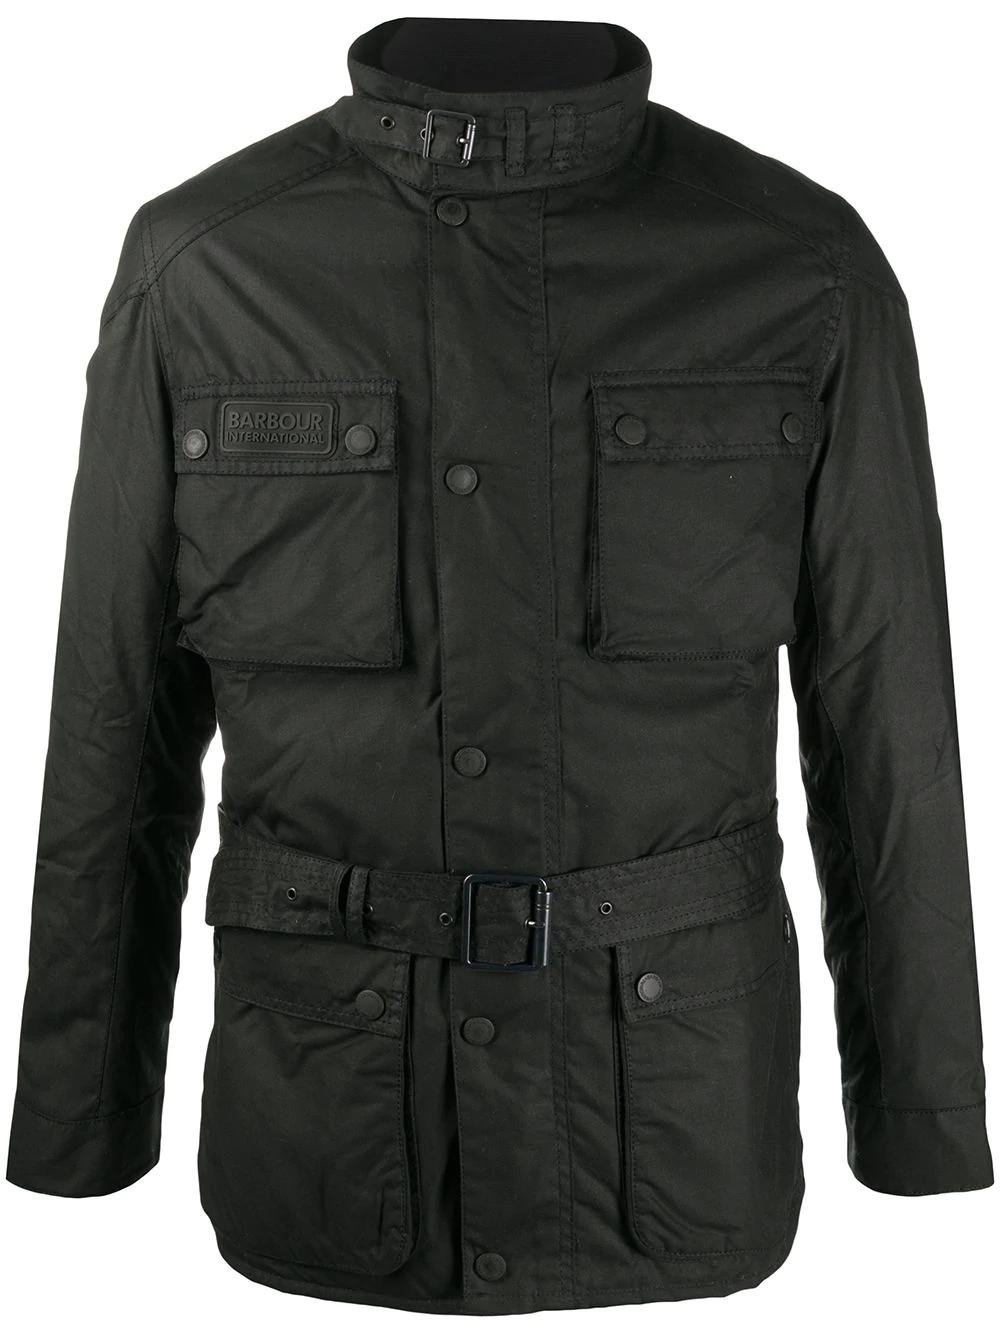 International Blackwell waxed jacket by BARBOUR | jellibeans